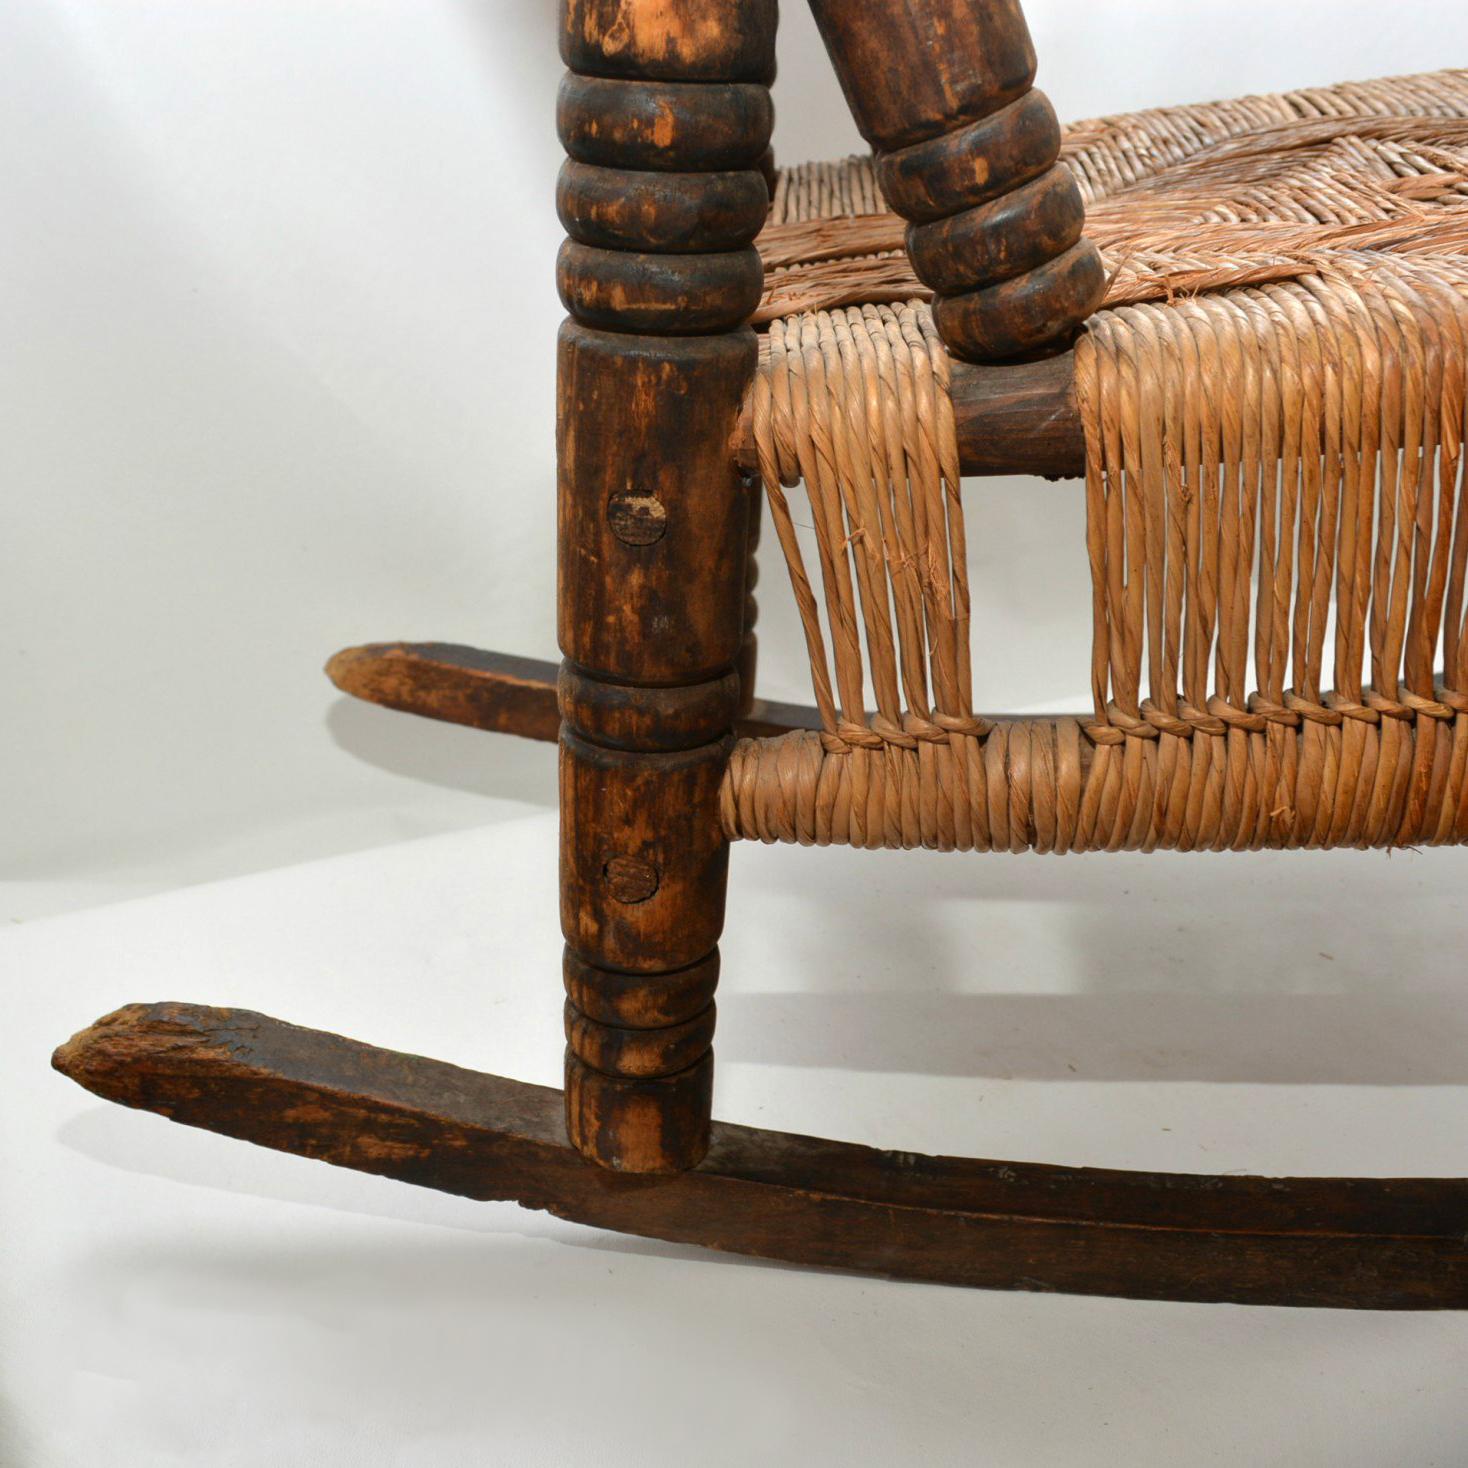 For your consideration an antique child rocker with arm rest. Original vintage patina. Wood frame with seagrass weaving. 

Unmarked. 

Mexico, circa 1930s.

Measures: 21 1/2" H x 21 1/4" D x 14 1/2" W. Seat 10" 

